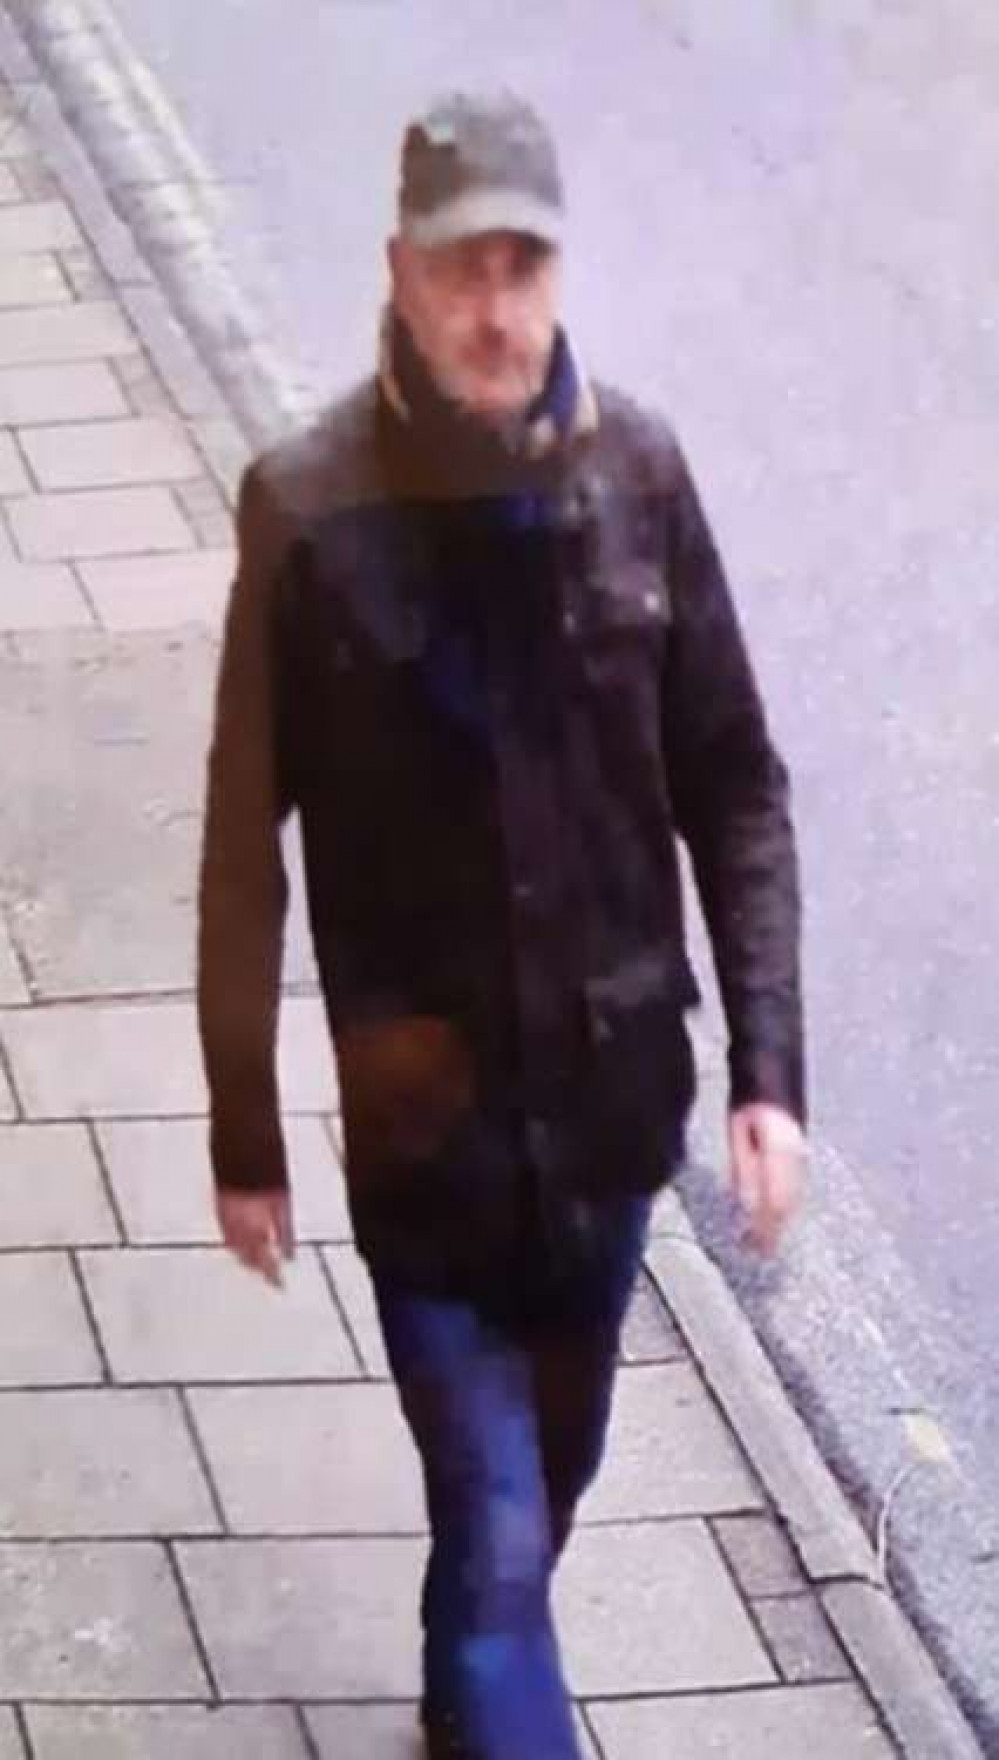 The police have released this image